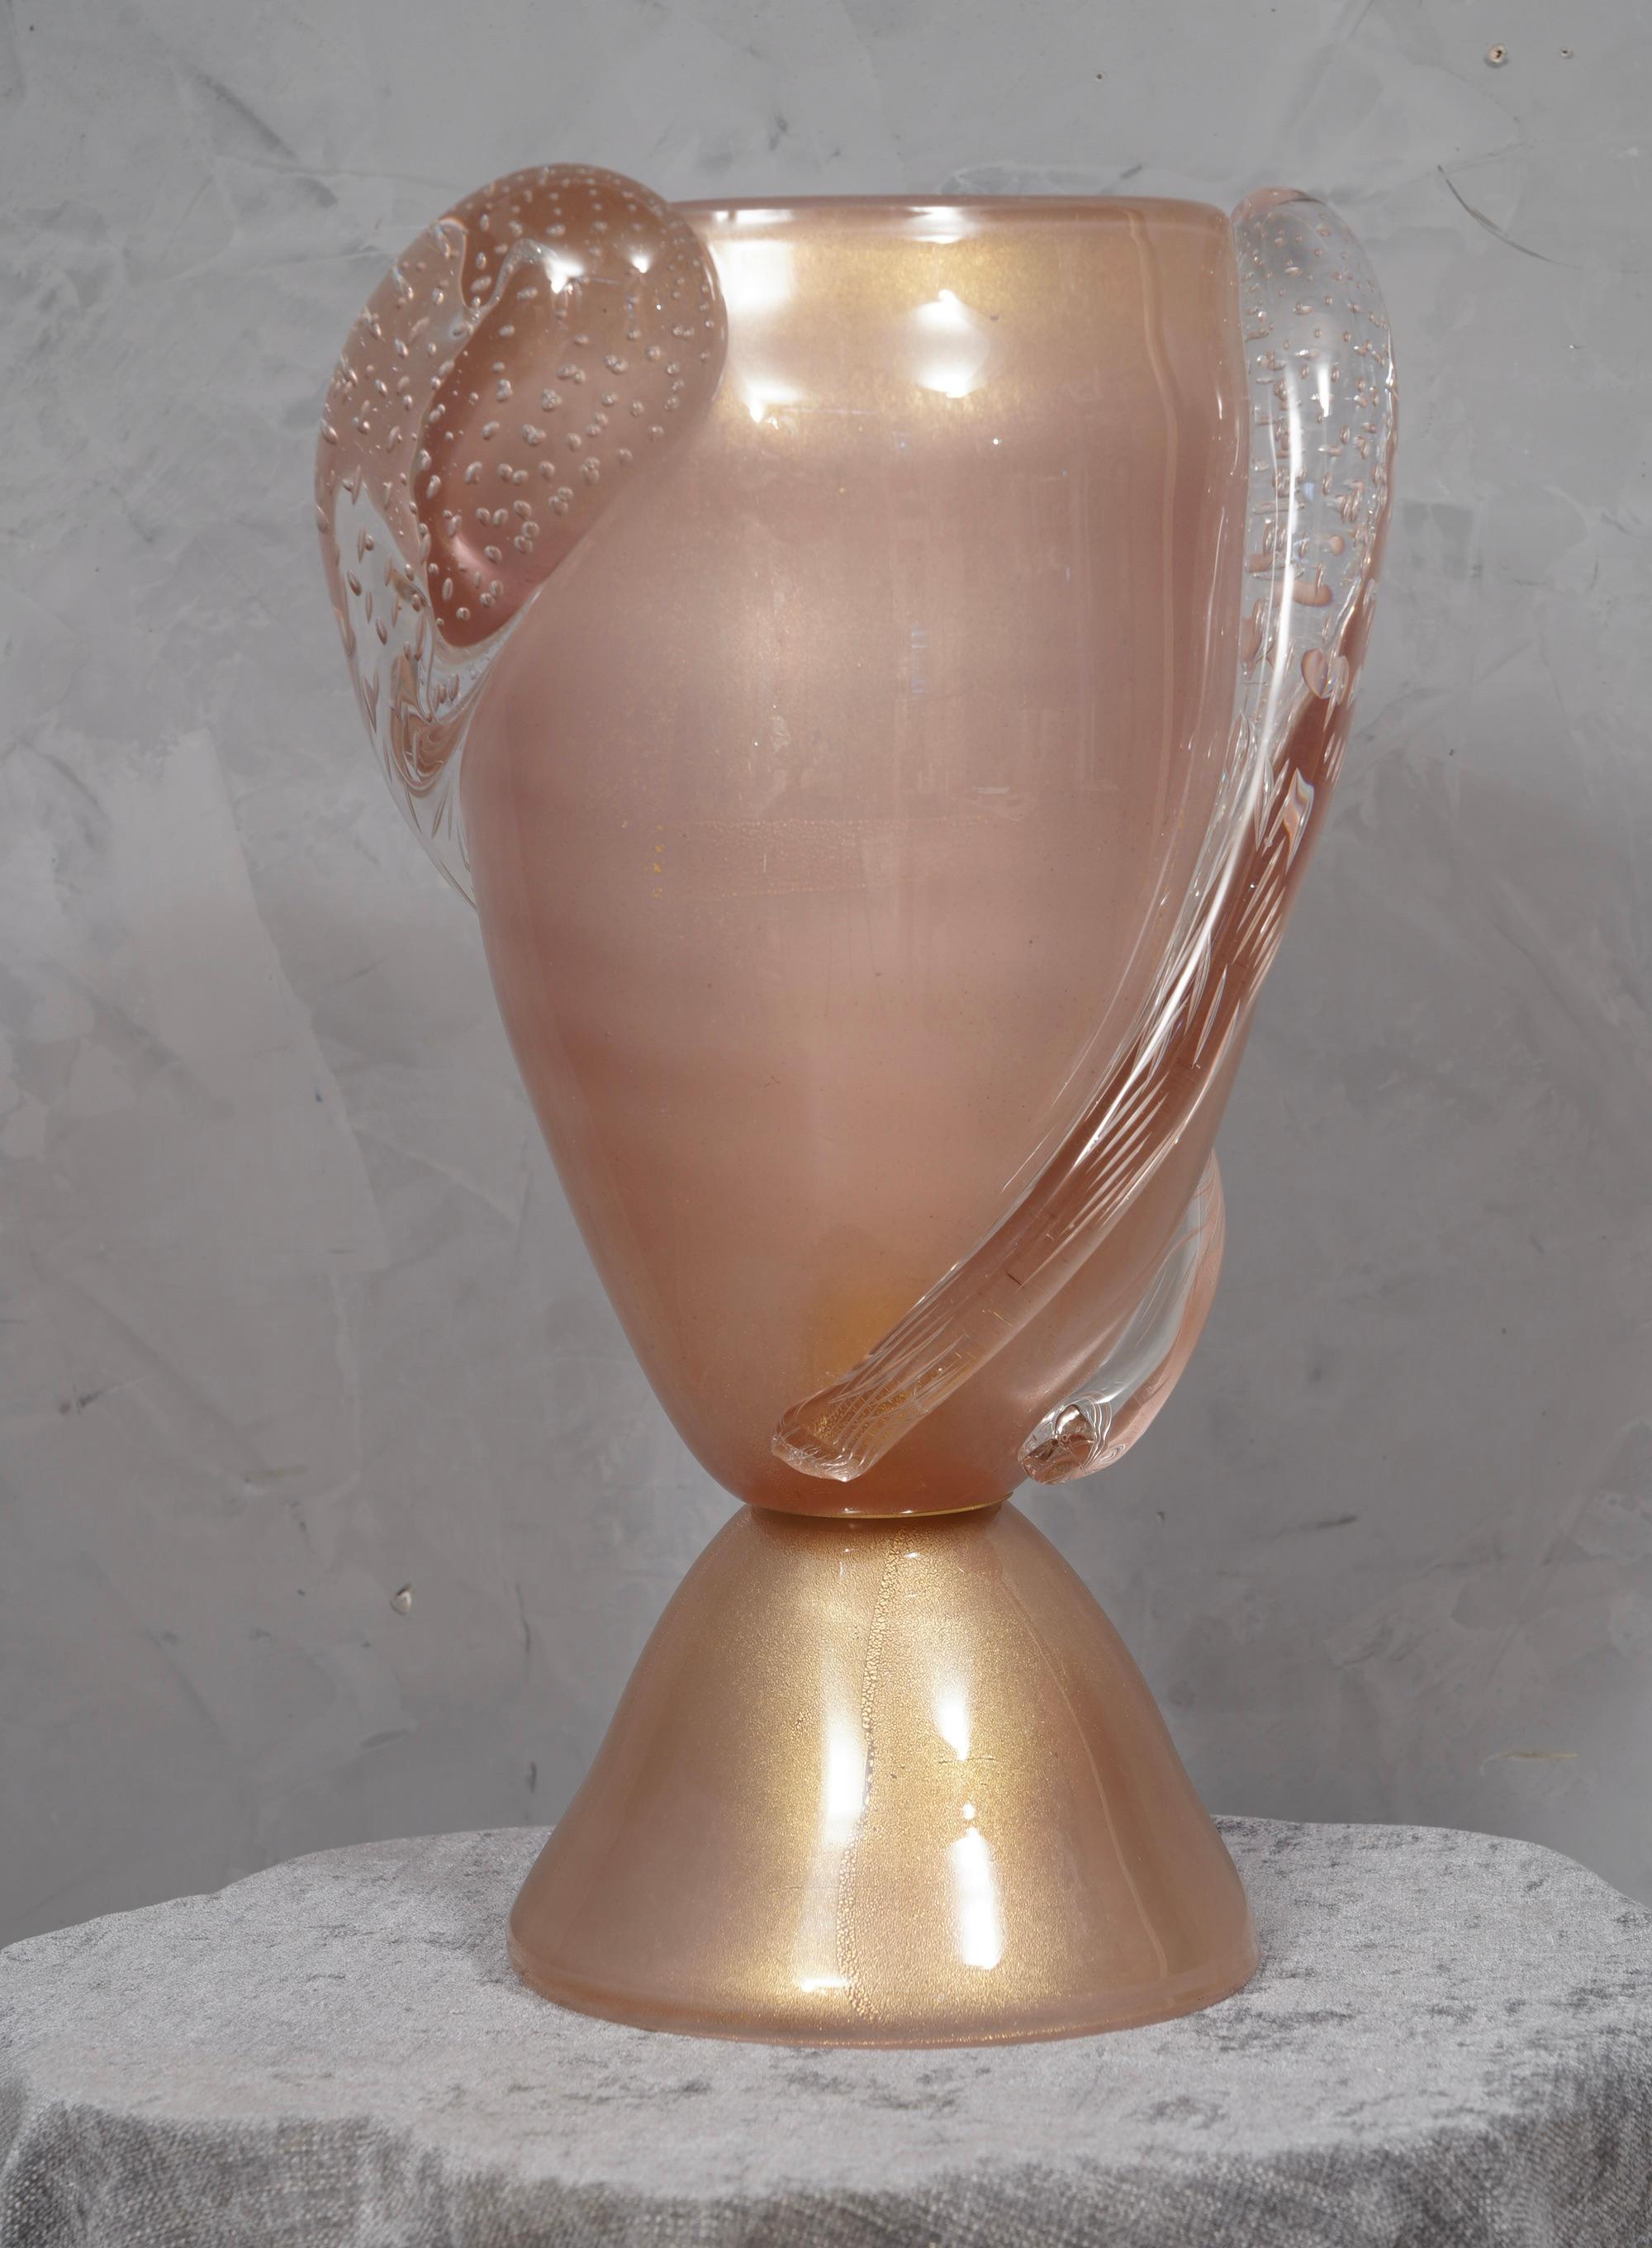 Splendid Barovier & Toso table lamps in Murano glass. Note the beautiful hot-attached stretched drops. A supreme light pink color, with some gold inside.

Murano lamps are composed of a large cup in the shape of an amphora, to which large glass